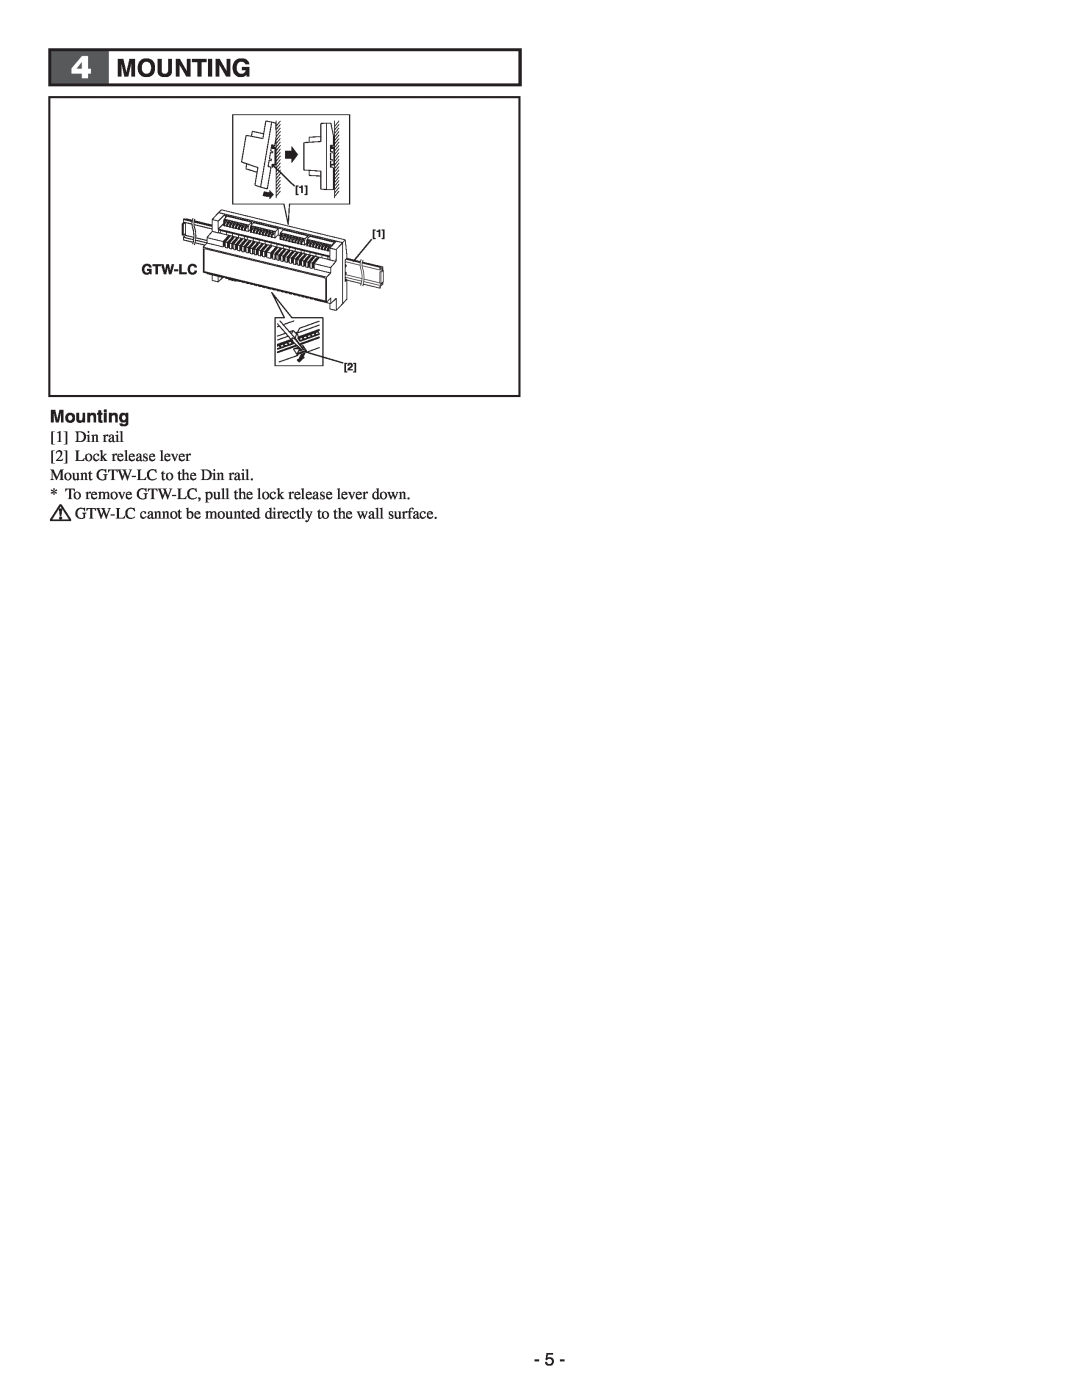 Aiphone GTW-LC service manual Mounting 